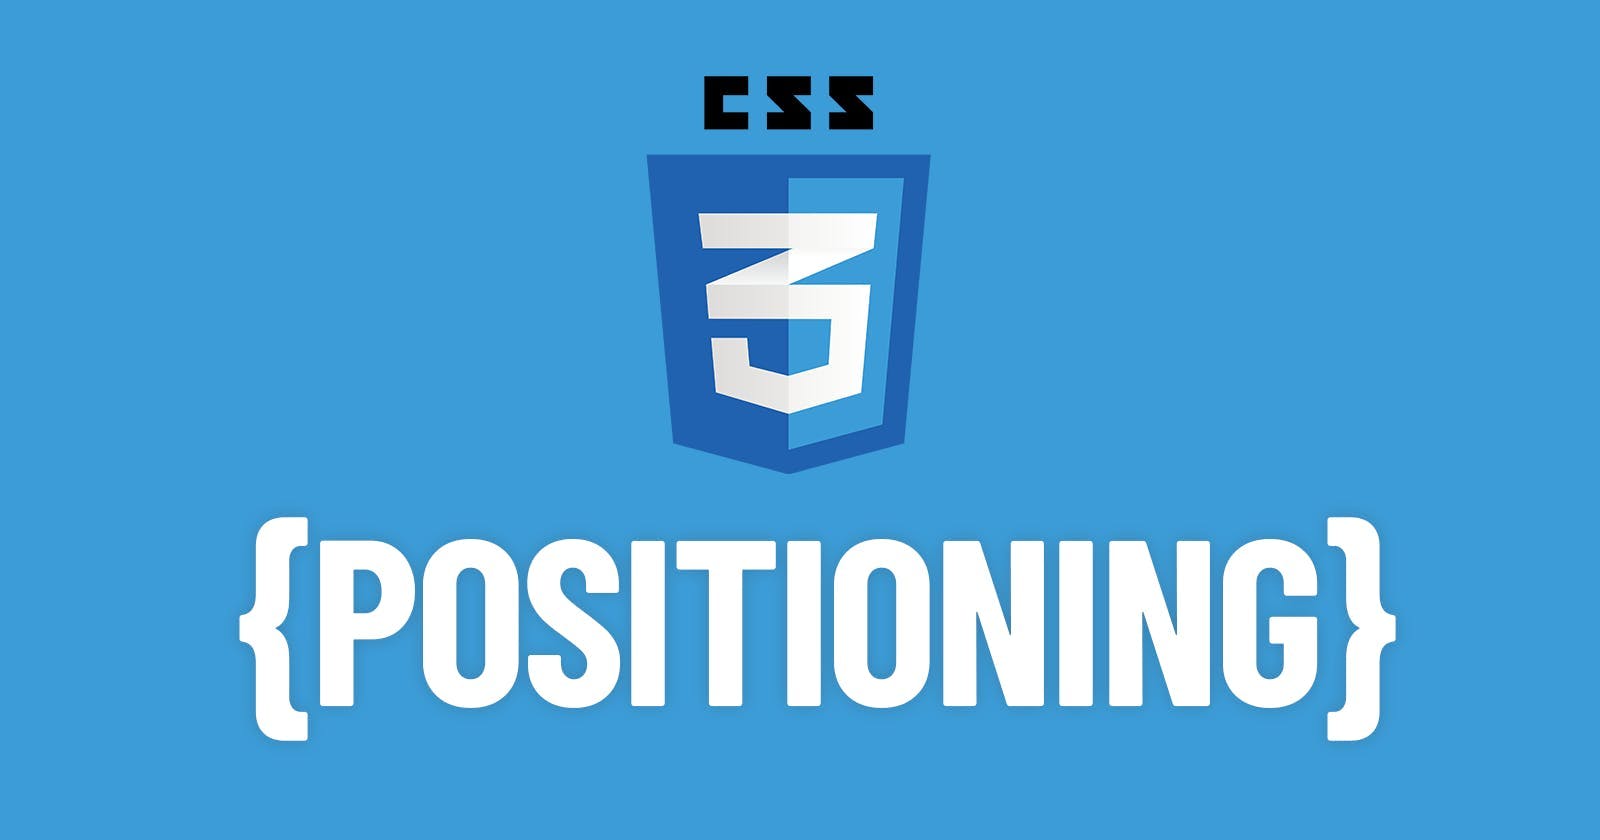 CSS positioning